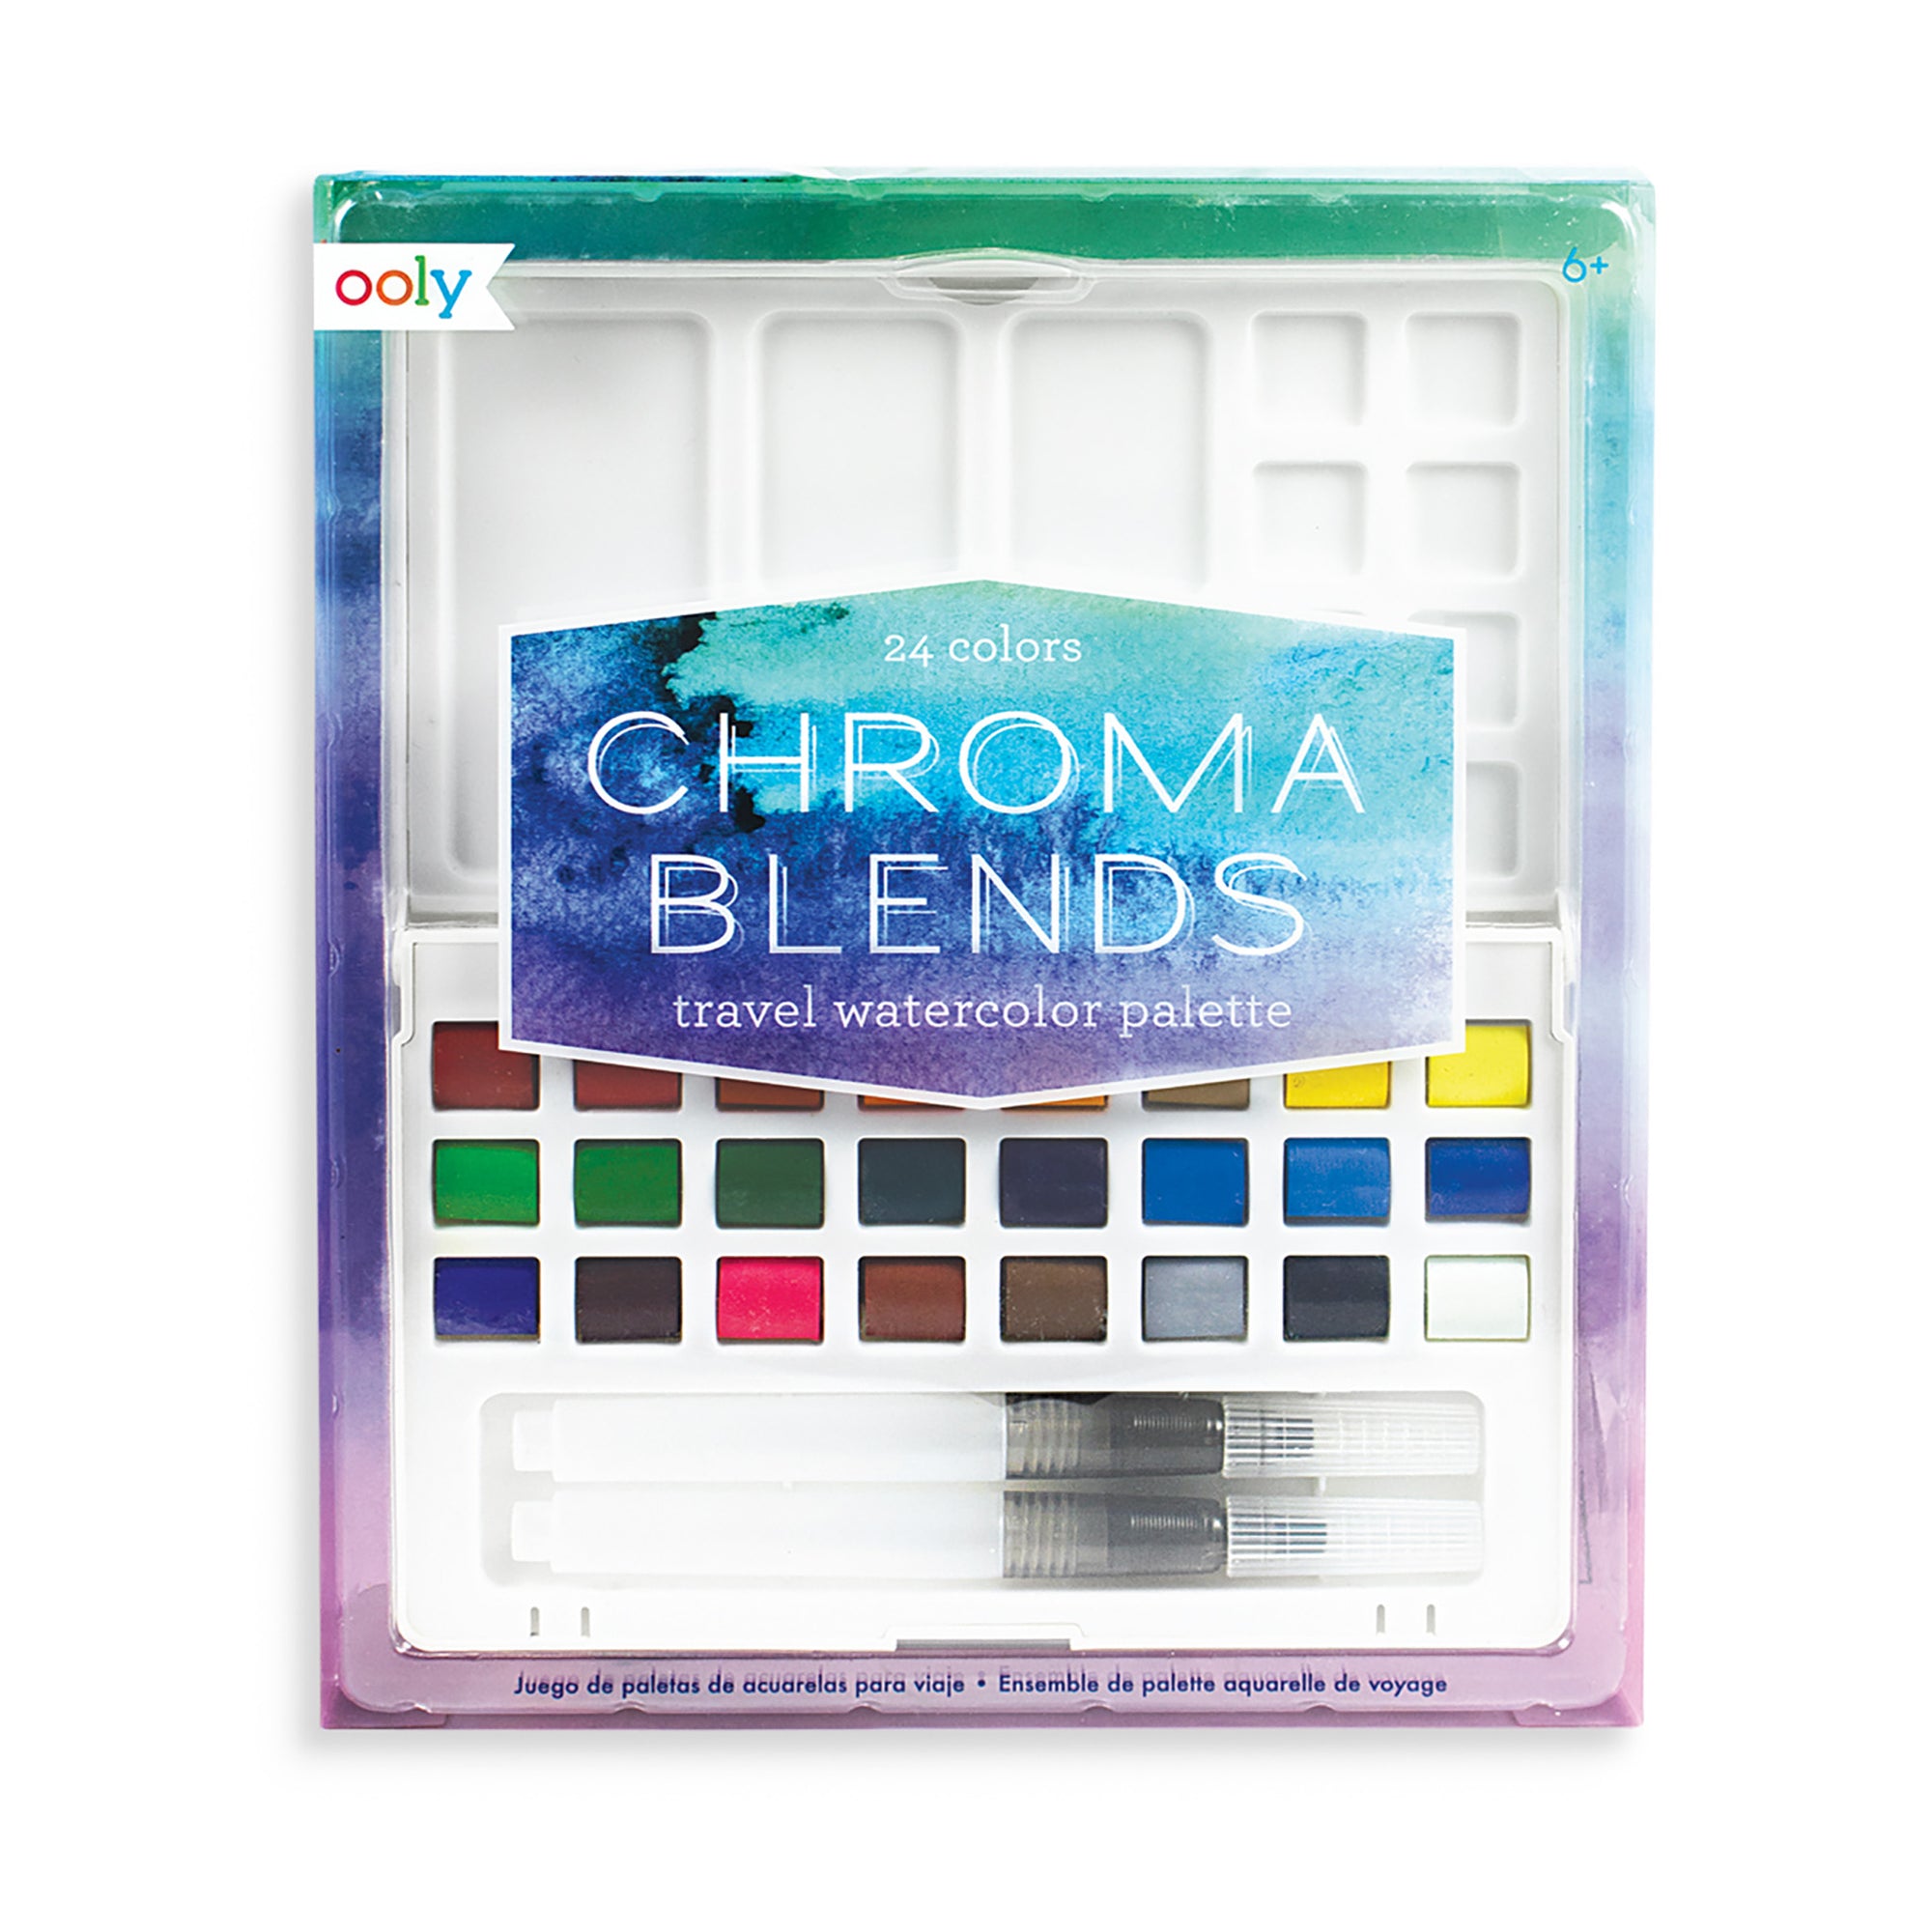 Chroma Blends Travel Watercolor Palette | Getty Store